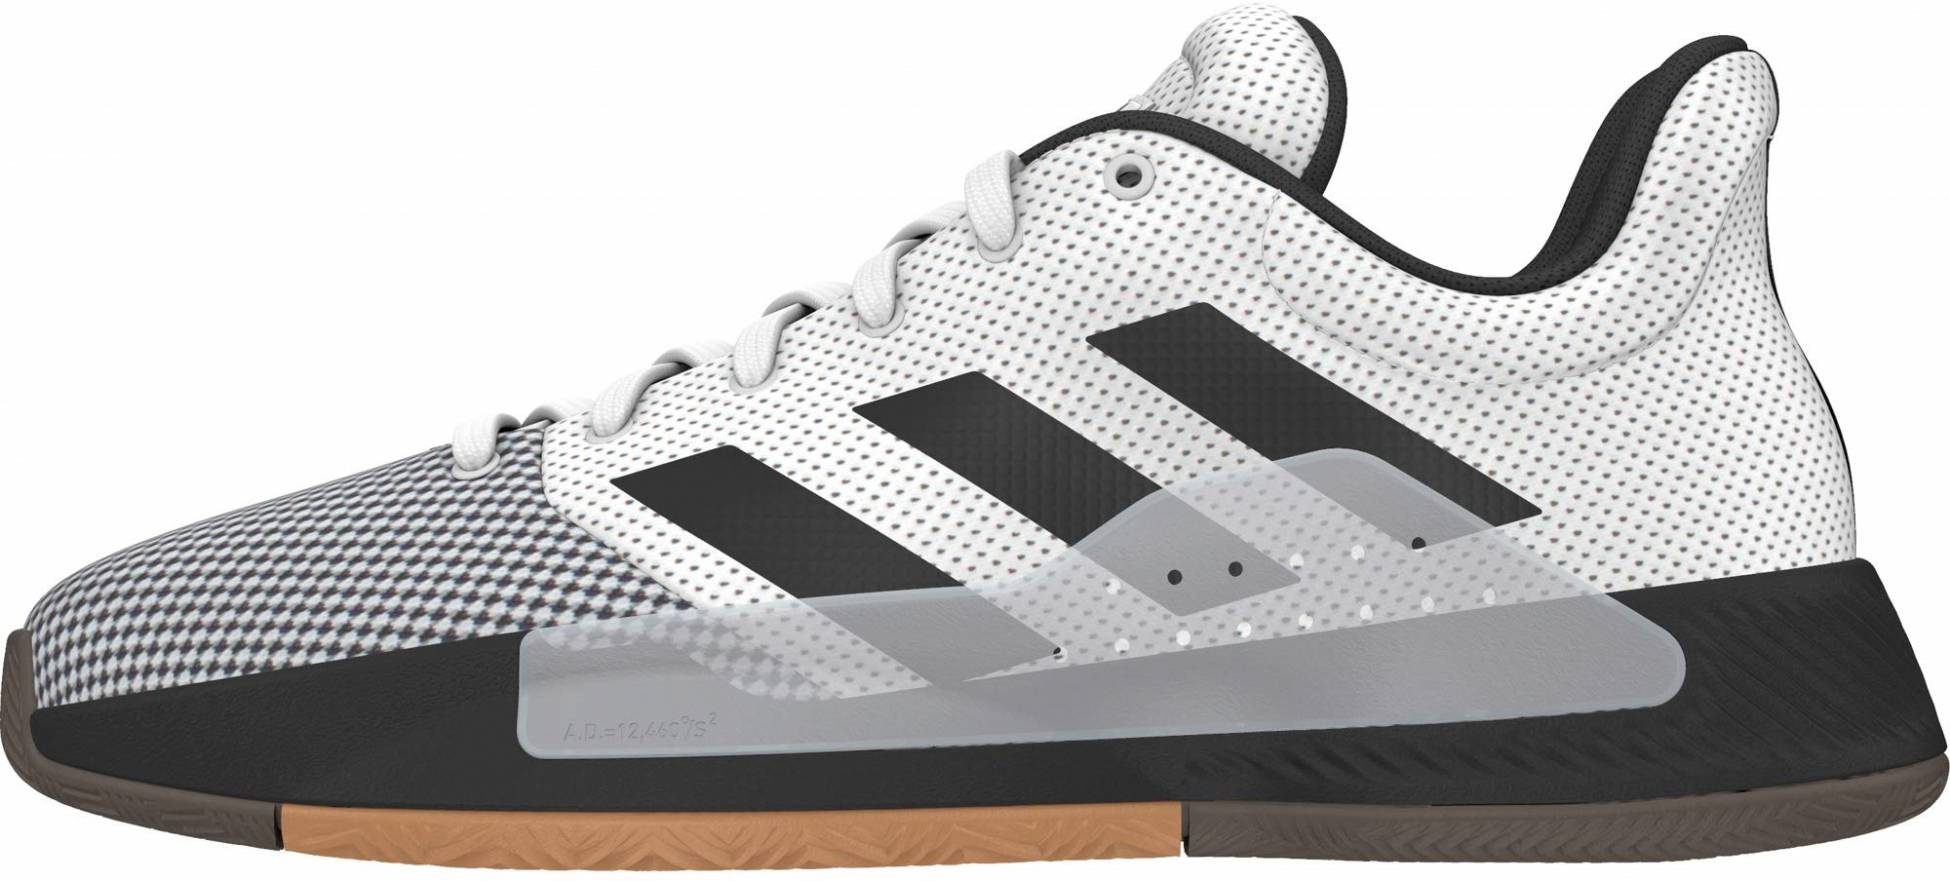 Adidas Pro Bounce Madness Low 2019 - Deals ($79), Facts, Reviews ...